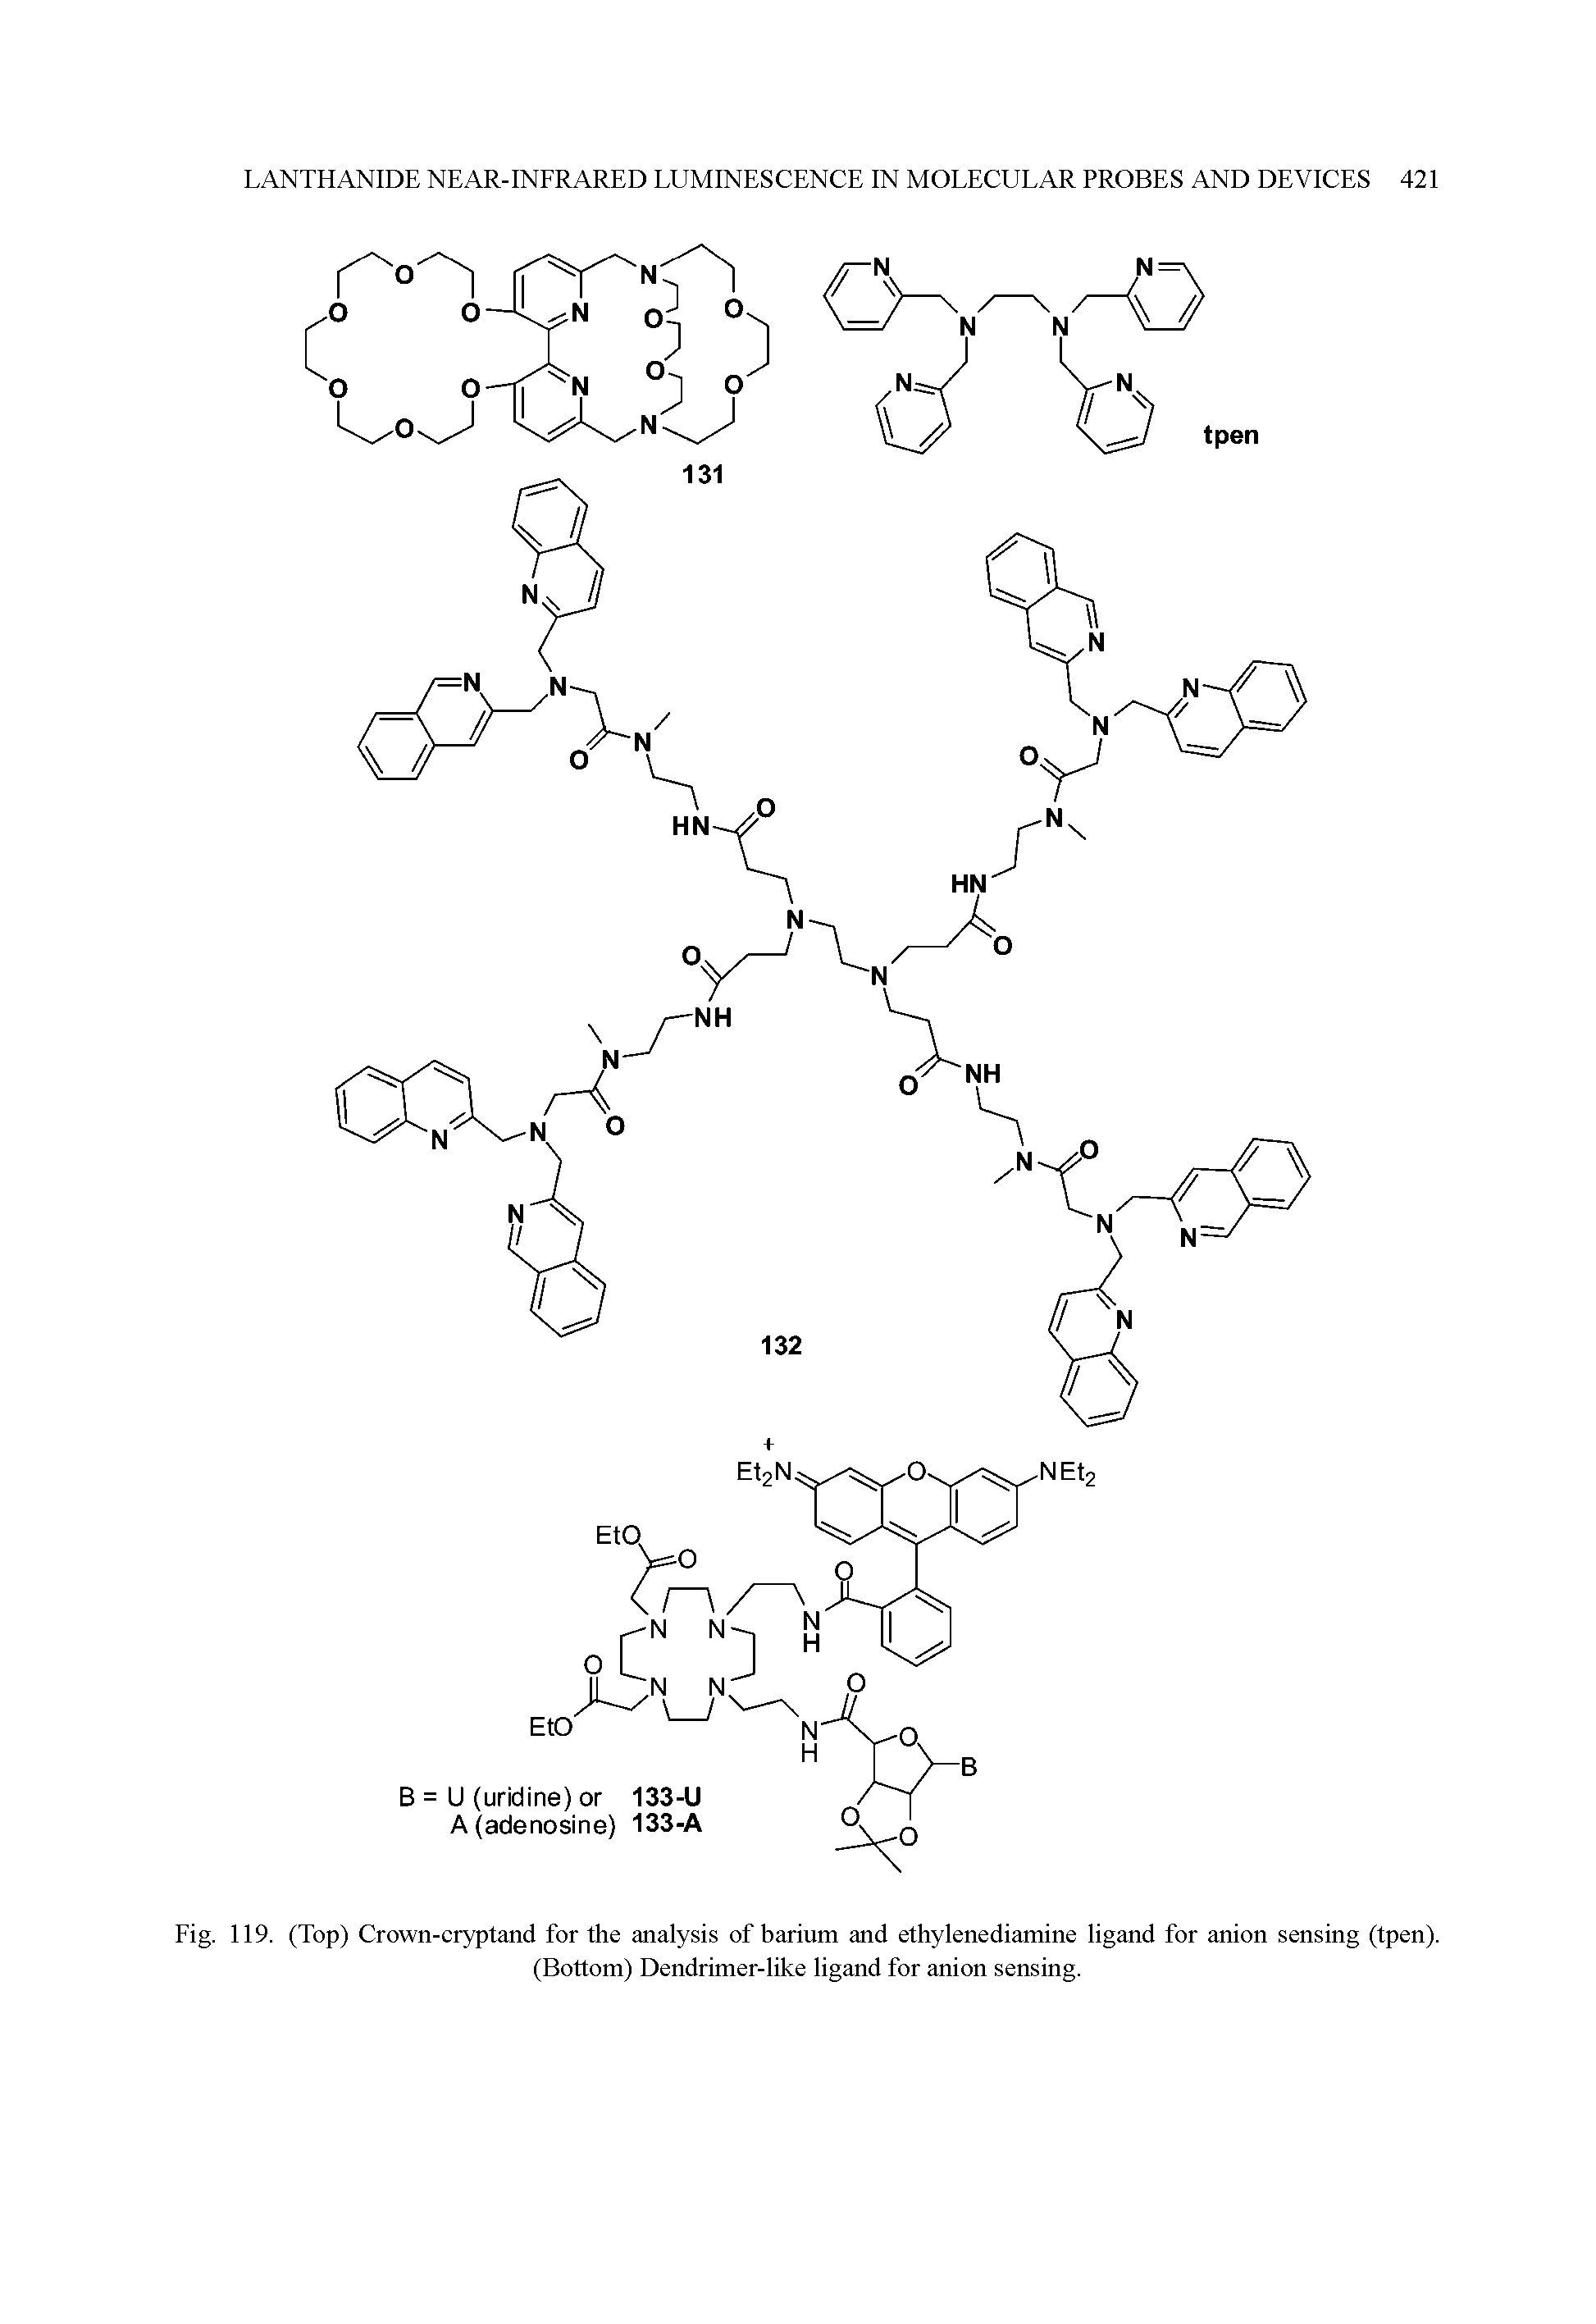 Fig. 119. (Top) Crown-cryptand for the analysis of barium and ethylenediamine ligand for anion sensing (tpen). (Bottom) Dendrimer-like ligand for anion sensing.